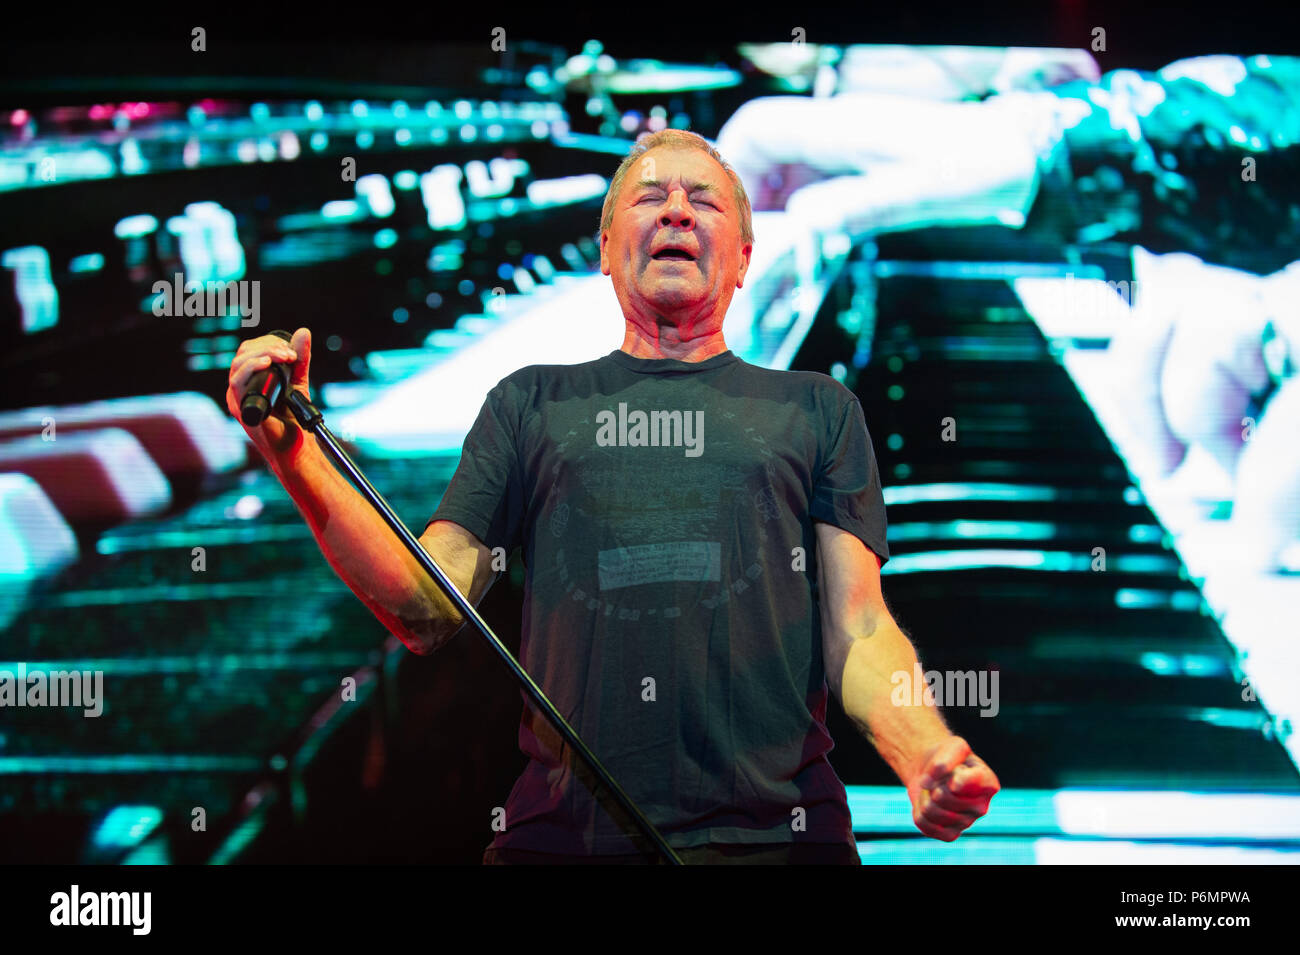 Deep Purple vocalist , Ian Gillan performs. Deep purple band performs at Tauron Arena Krakow as part of the farewell tour, The Long Goodbye Tour. Stock Photo